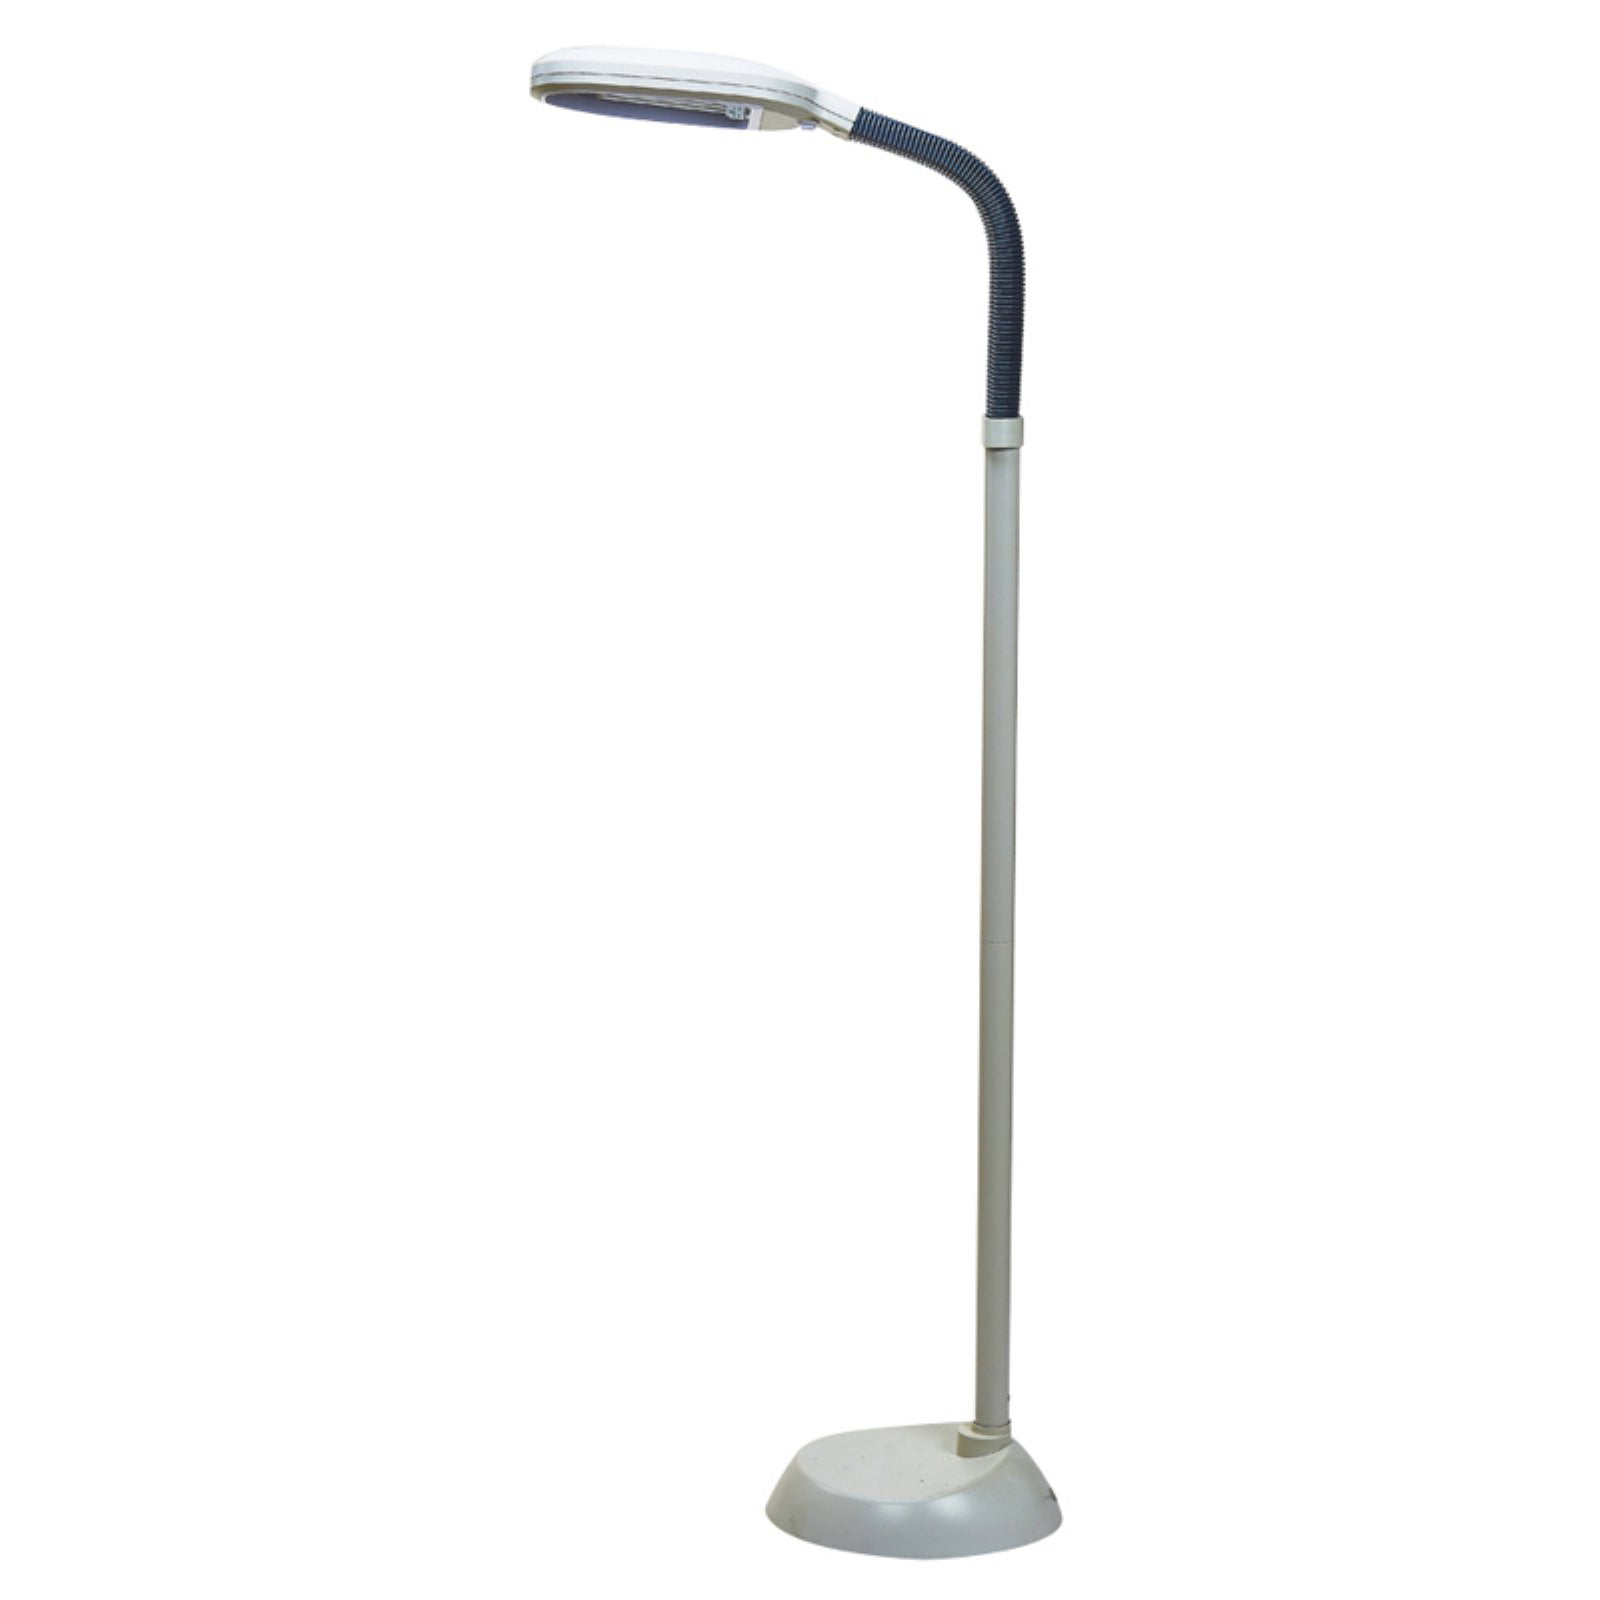 Gift Idea Home and Office Spectrum Fluorescent Daylight Floor Lamp 54" in Black 